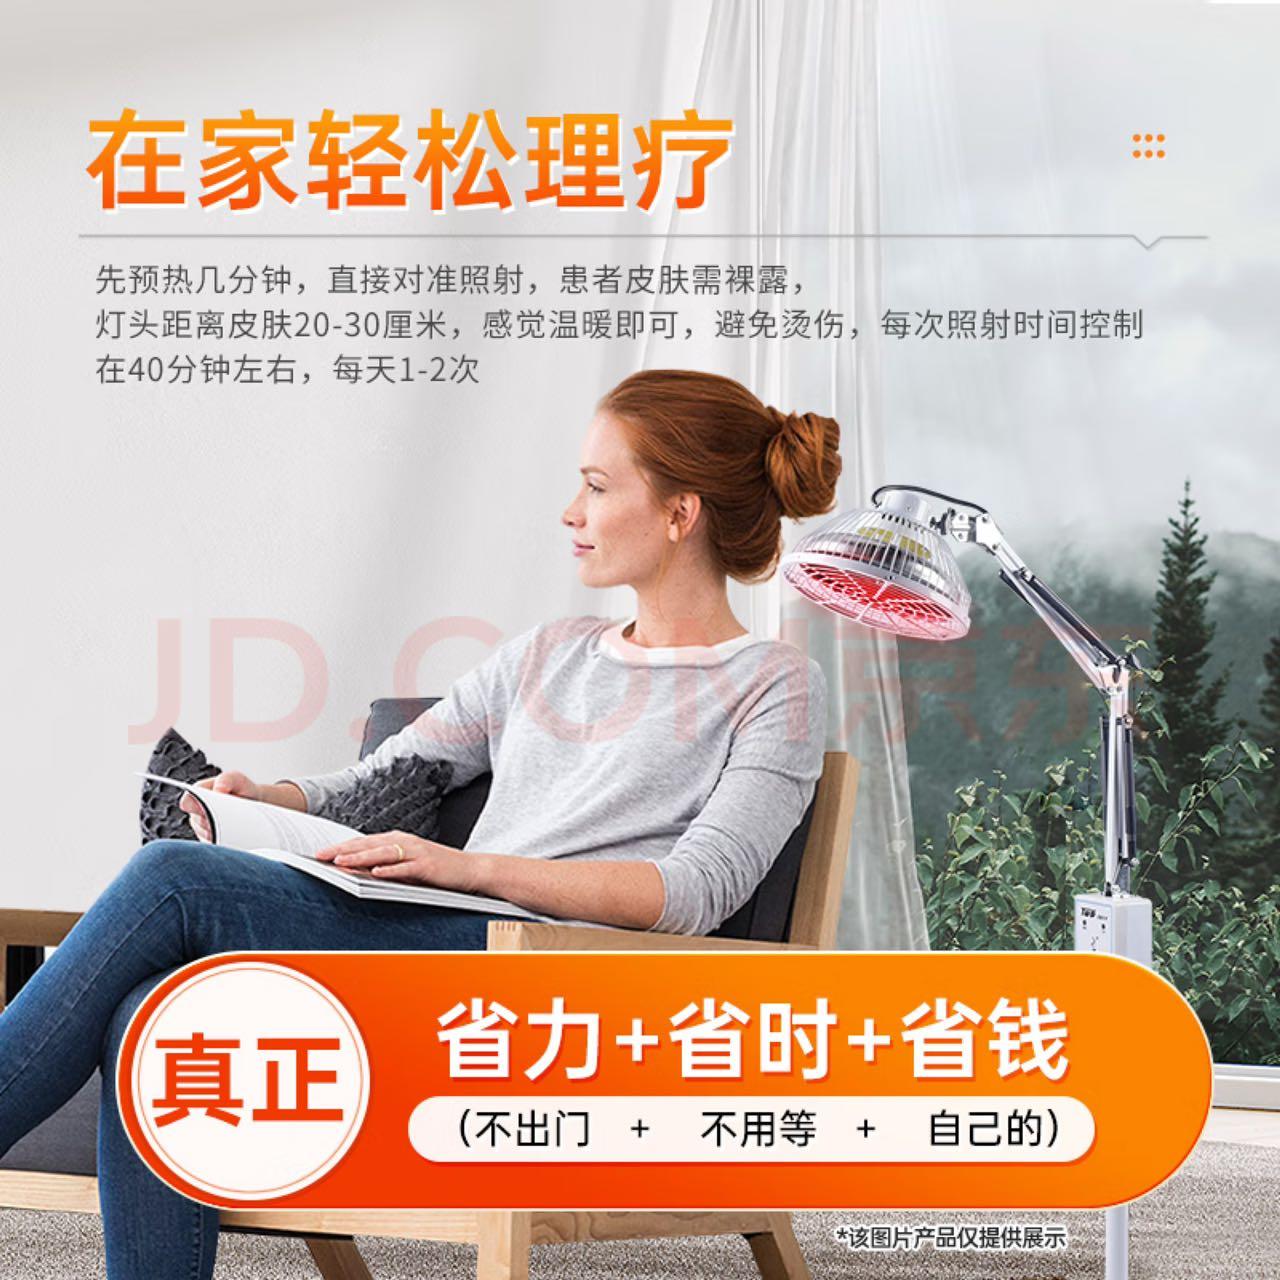 TDP Far-infrared physical therapy instrument CQ-36 - YOURISHOP.COM